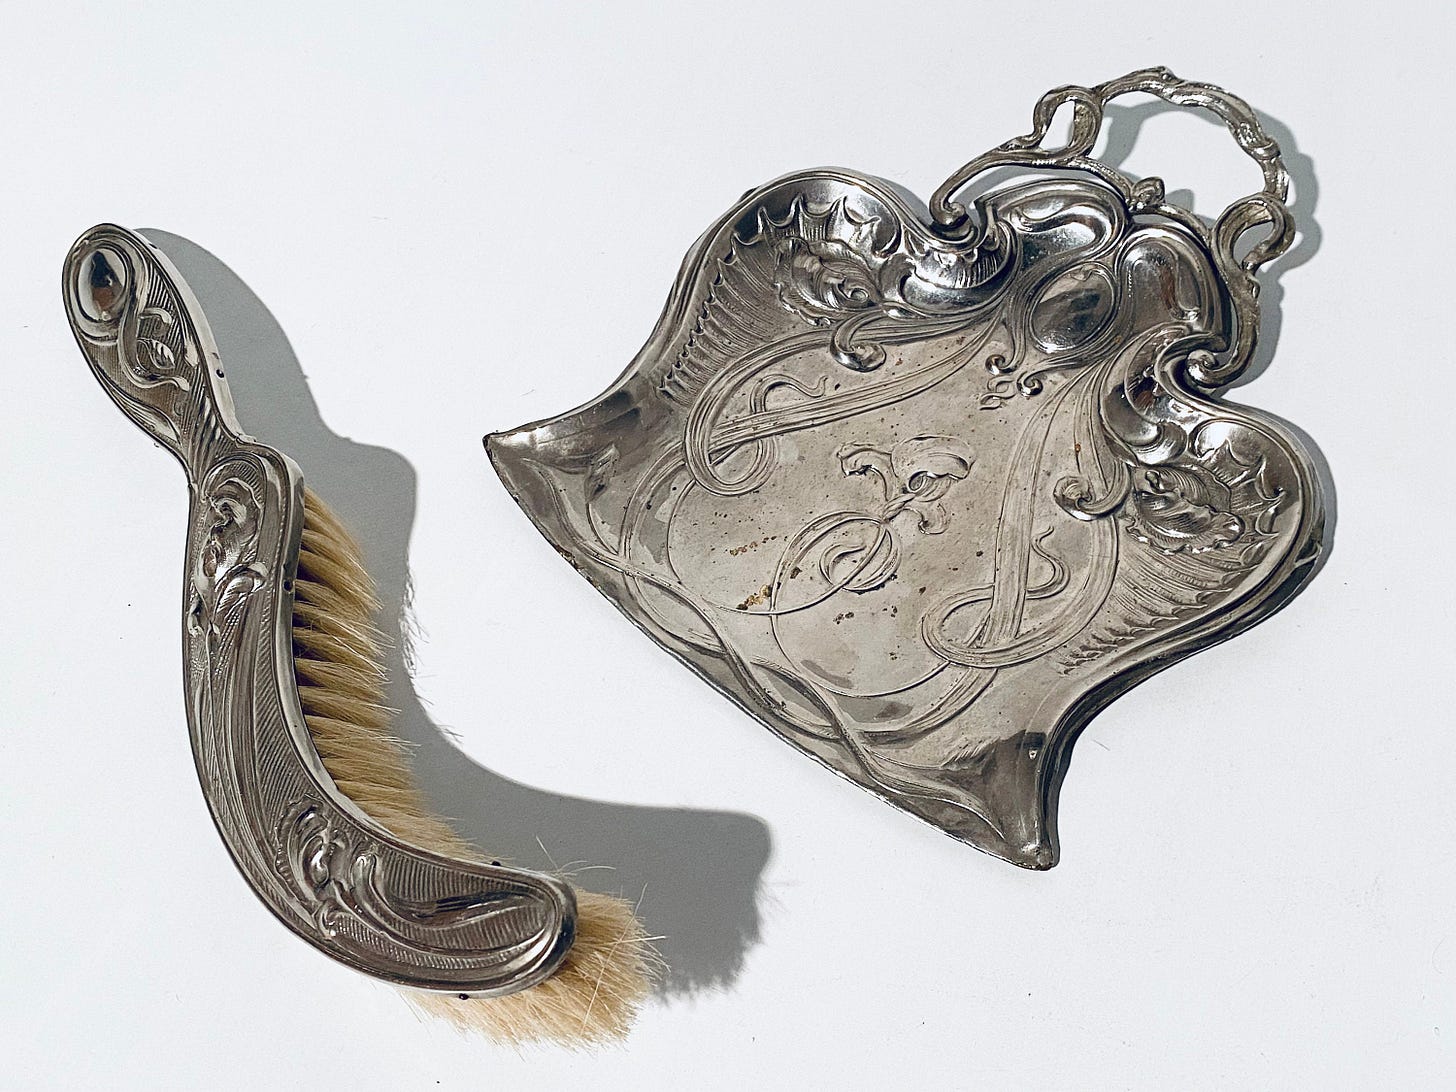 Example of a Victorian style table brush and pan set